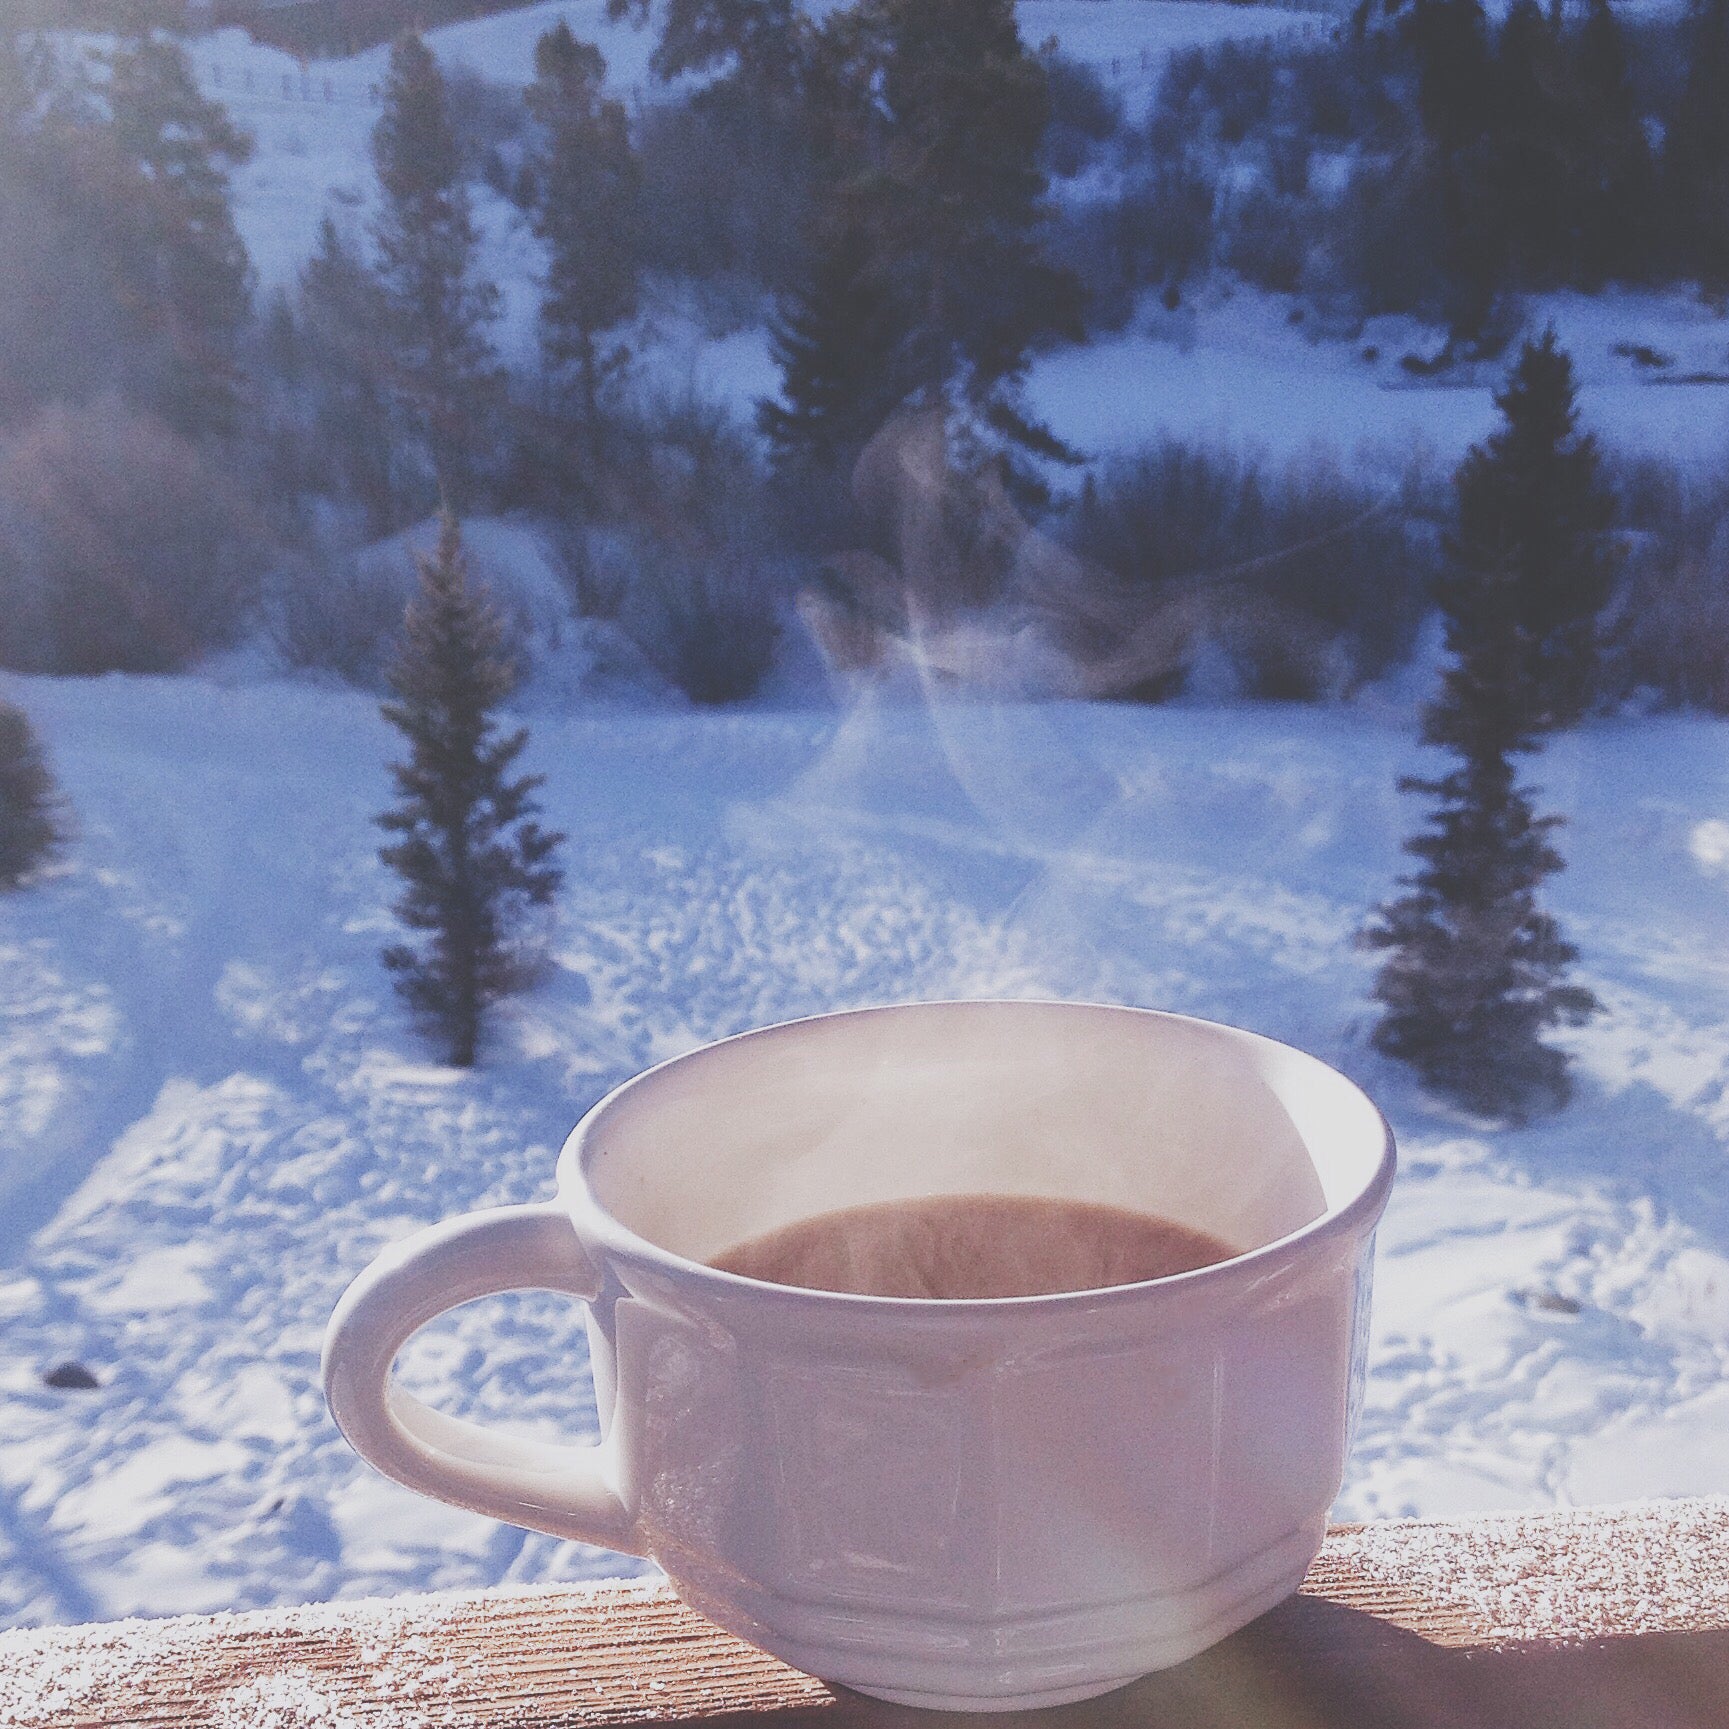 Healthy Hot Drink Recipes for the Winter